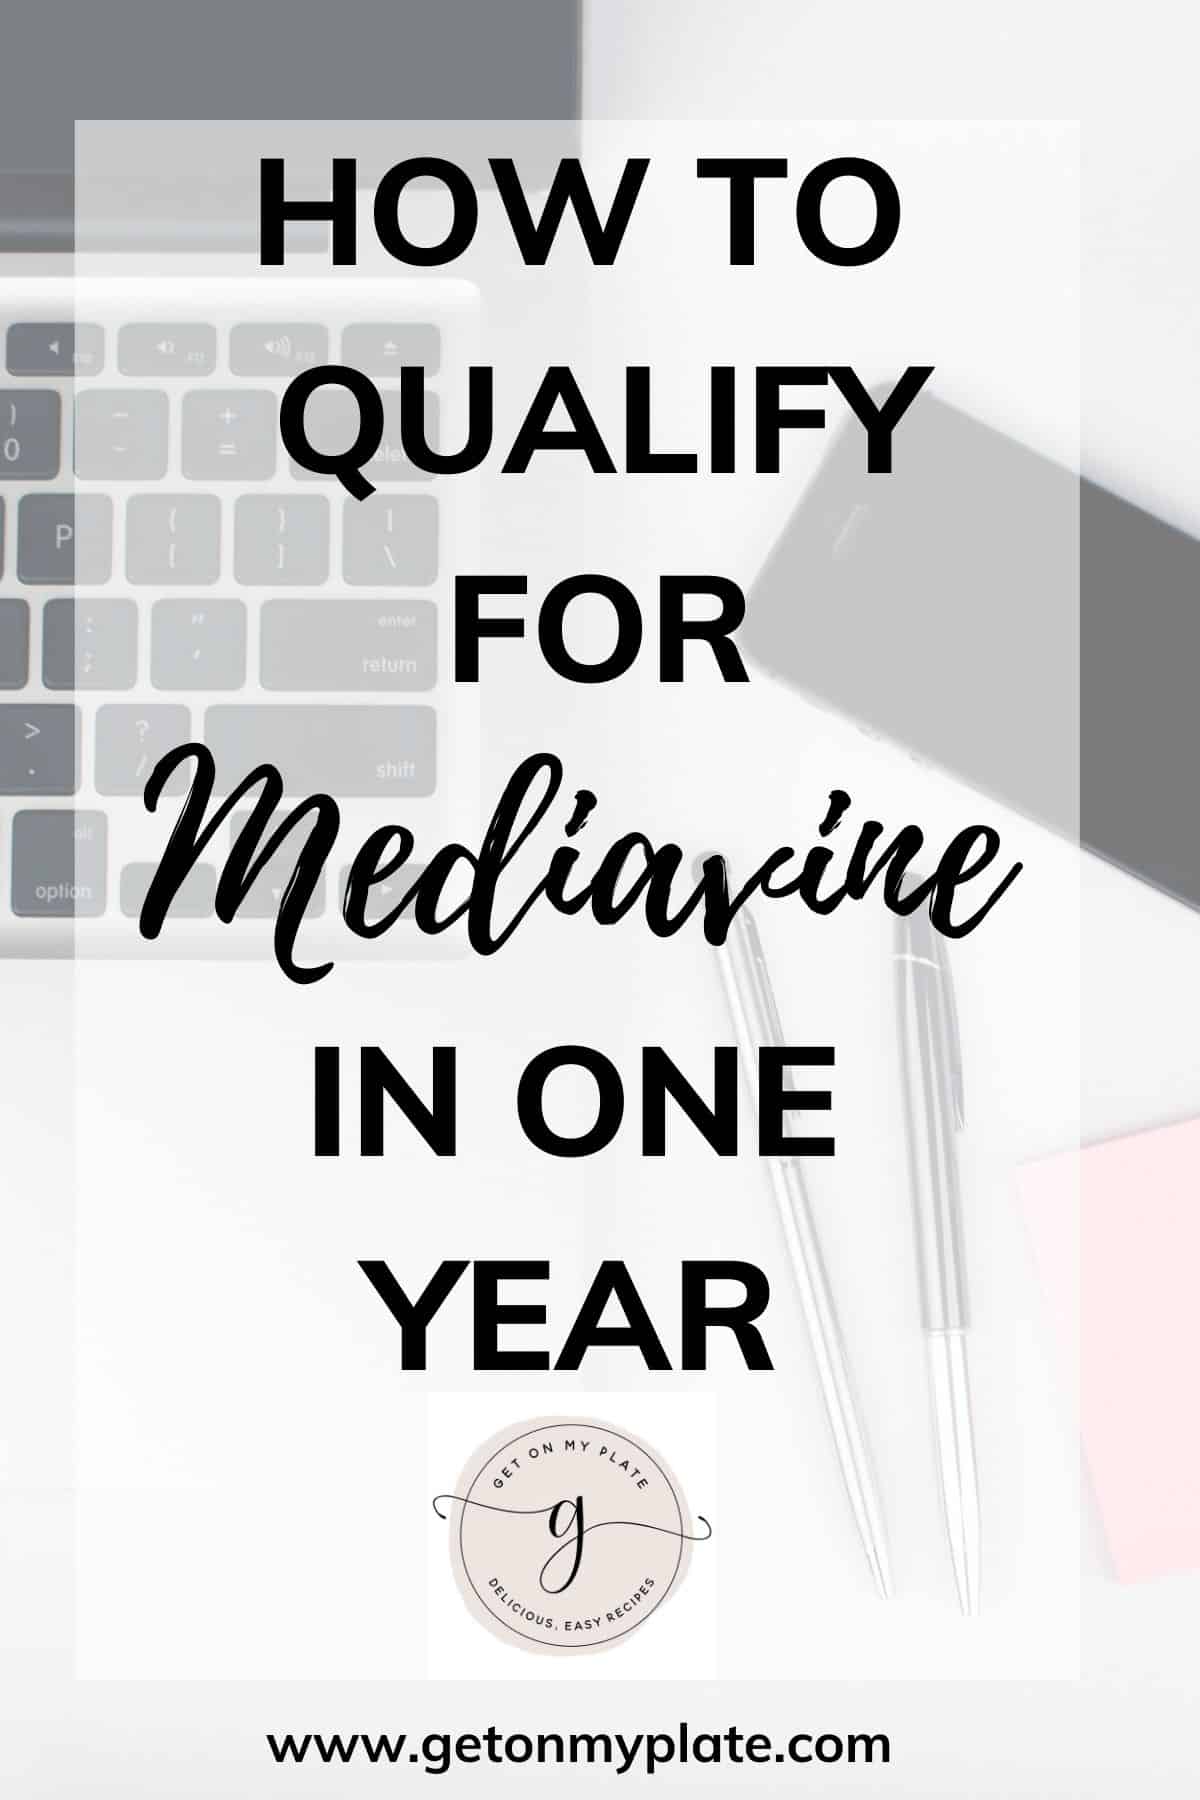 Graphic about how to qualify for Mediavine on one year.